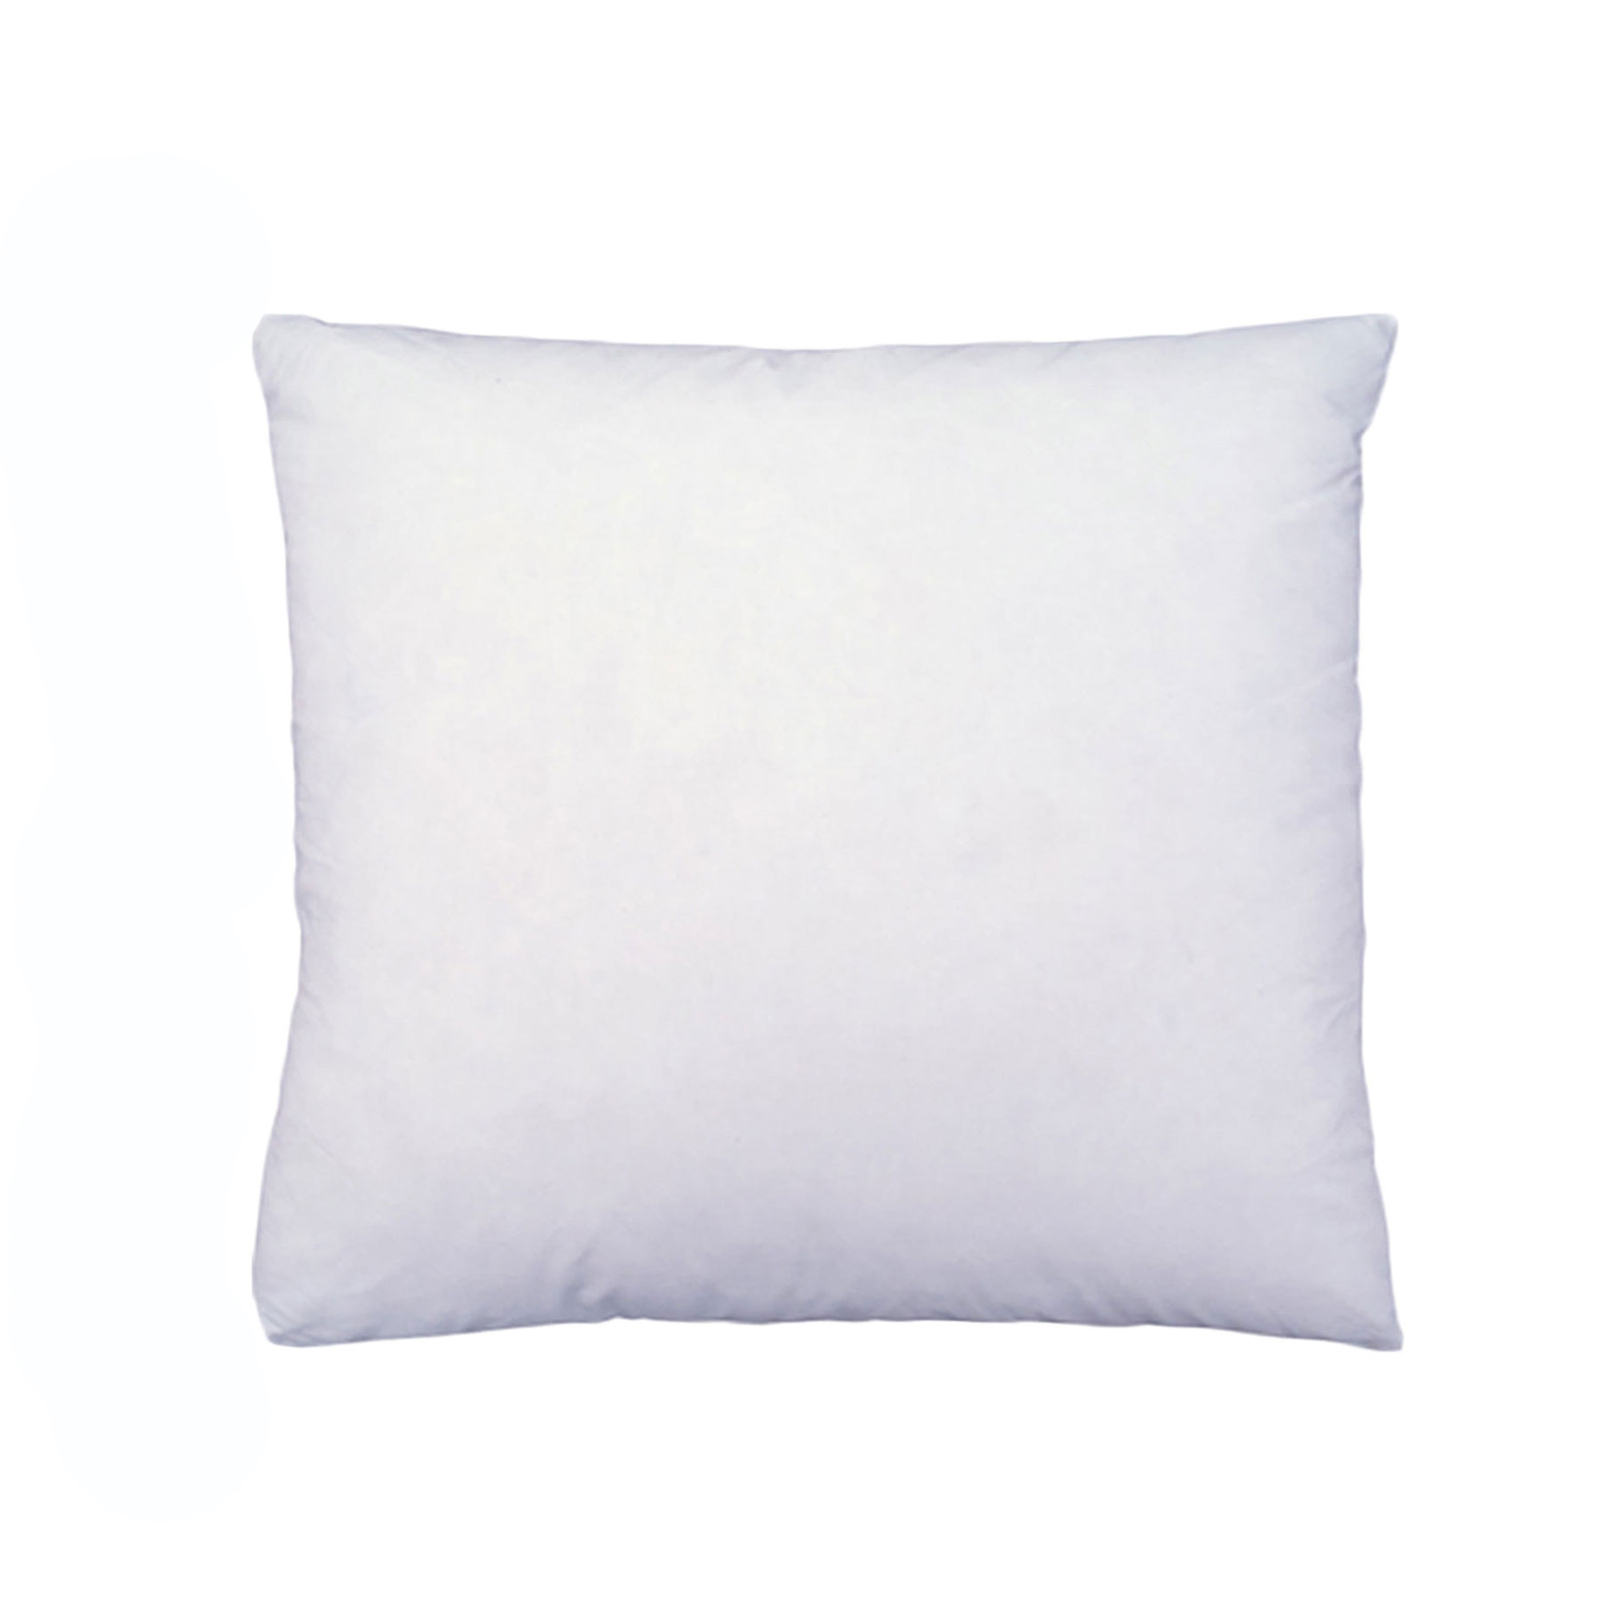 Easyrest Cushion Insert Square Price